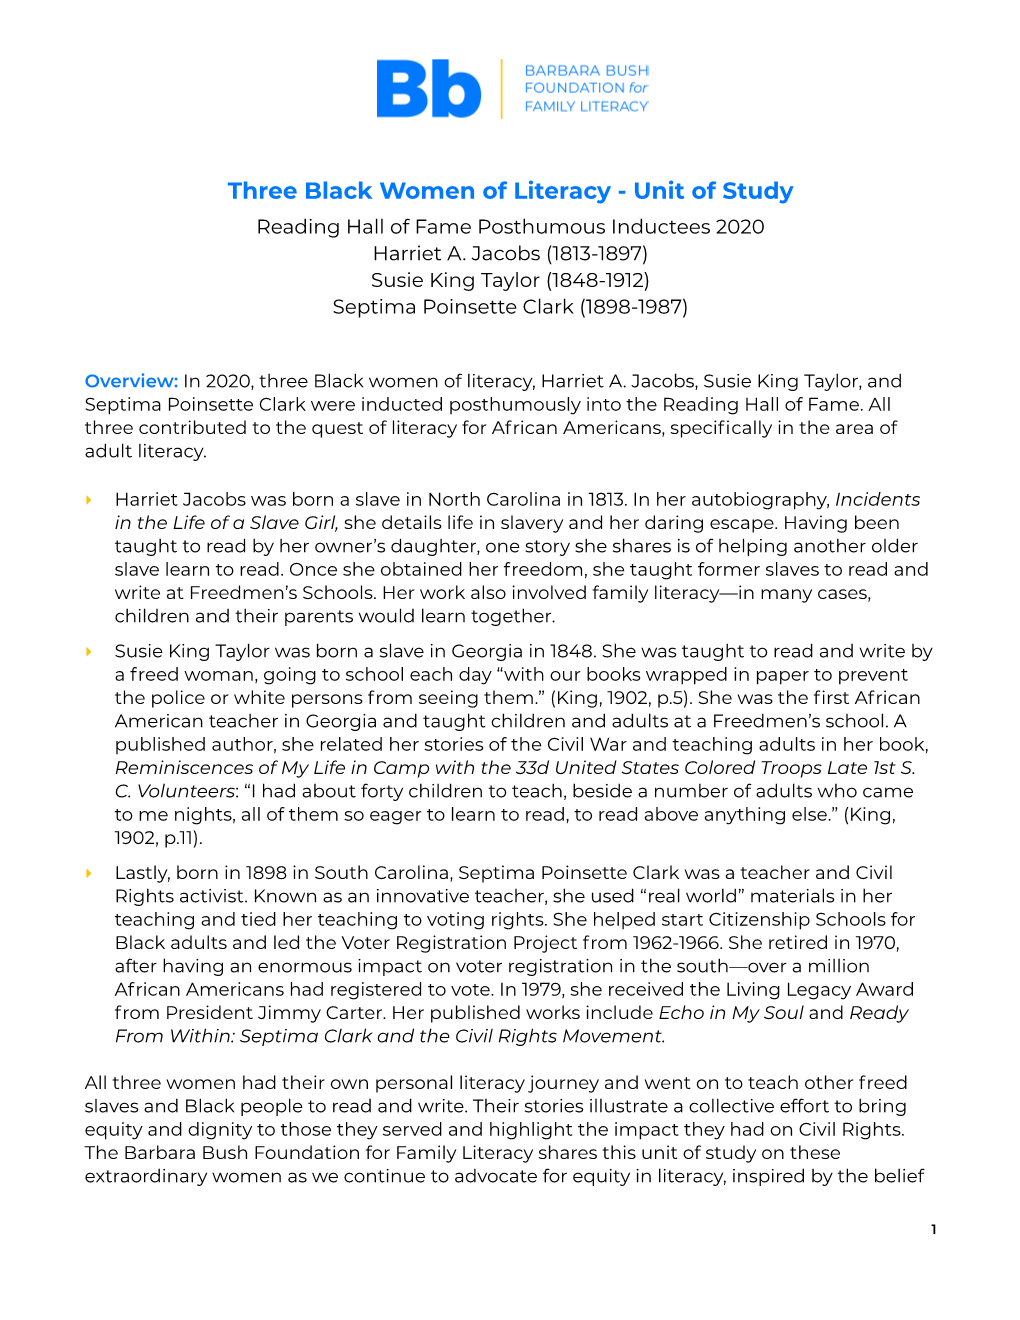 Three Black Women of Literacy - Unit of Study Reading Hall of Fame Posthumous Inductees 2020 Harriet A